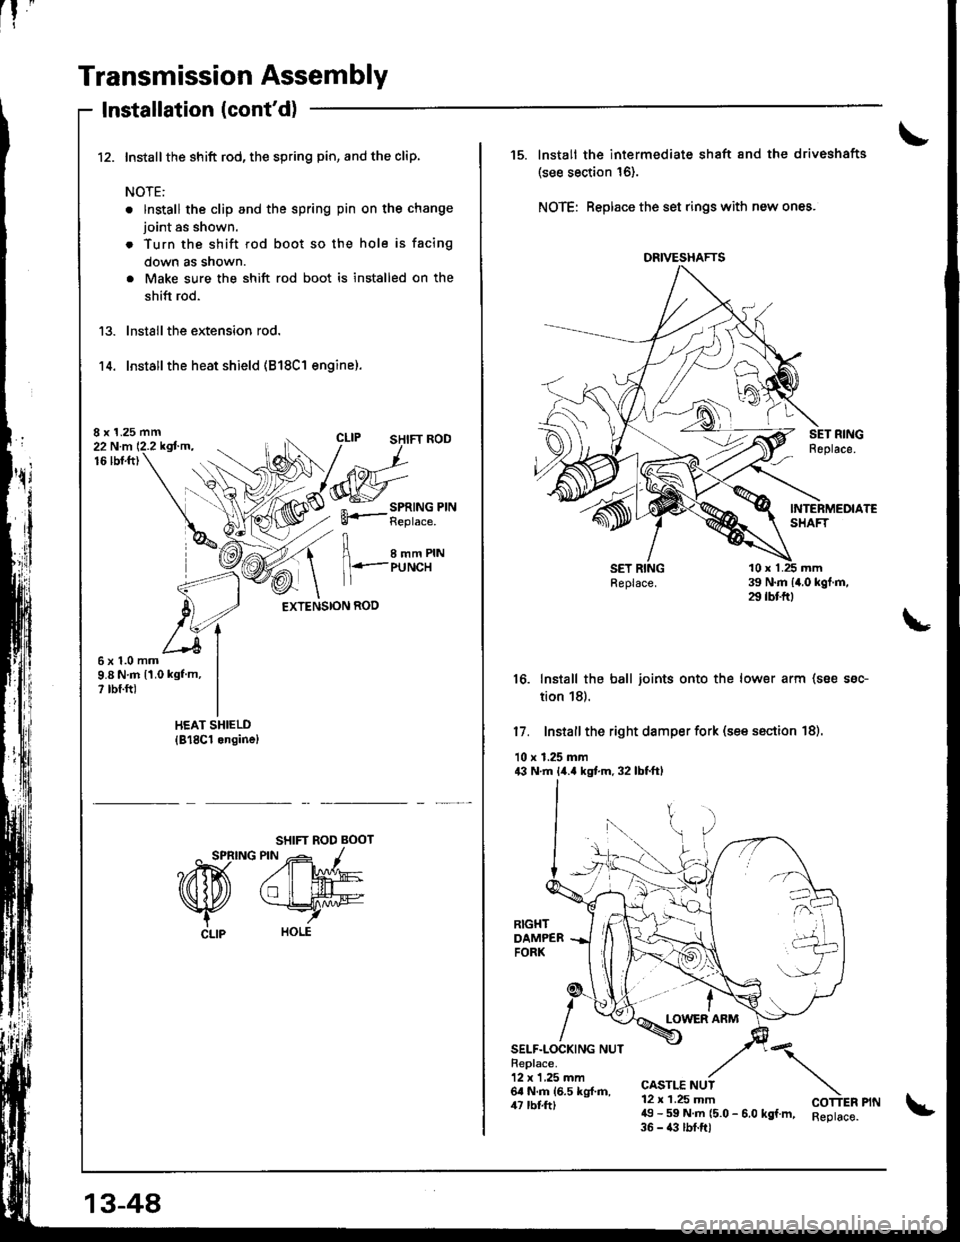 HONDA INTEGRA 1998 4.G Workshop Manual [! 
"
Transmission Assembly
Installation (contd)
Install the shift rod, the spring pin, and the clip.
NOTE:
. lnstall the clip and the spring pin on the change
joint as shown.
. Turn the shift rod bo